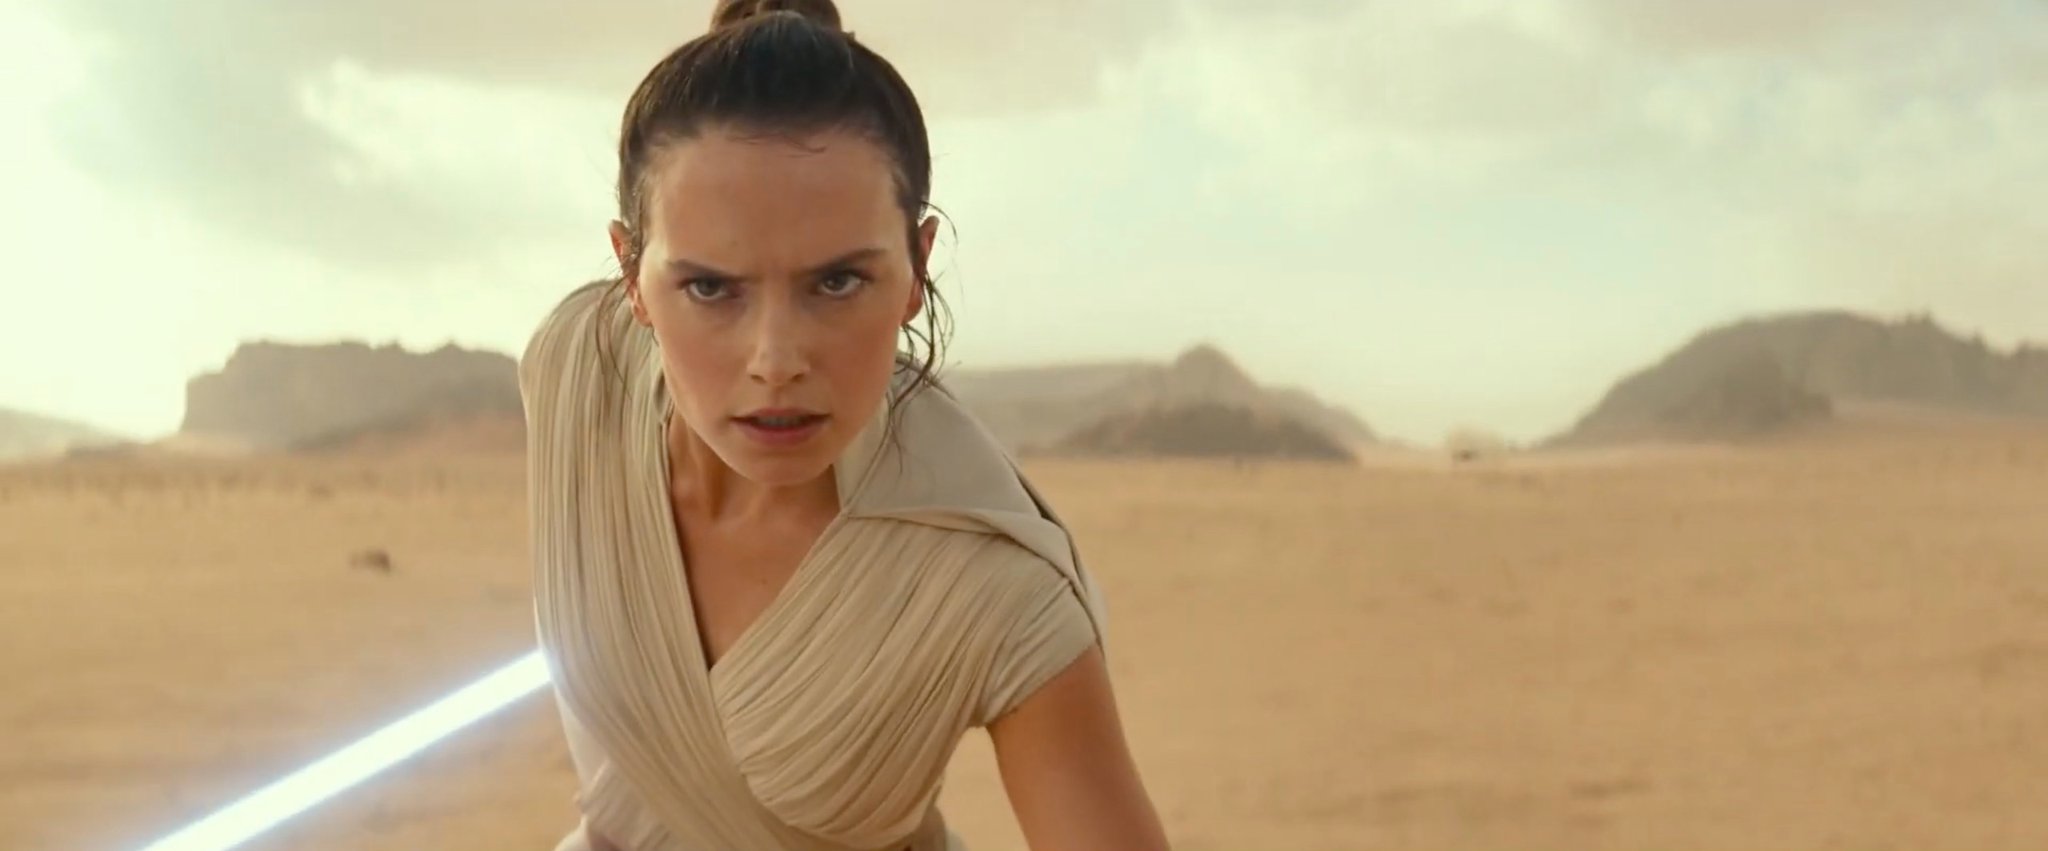 cayden sparks recommends Star Wars The Force Awakens Rey Nude